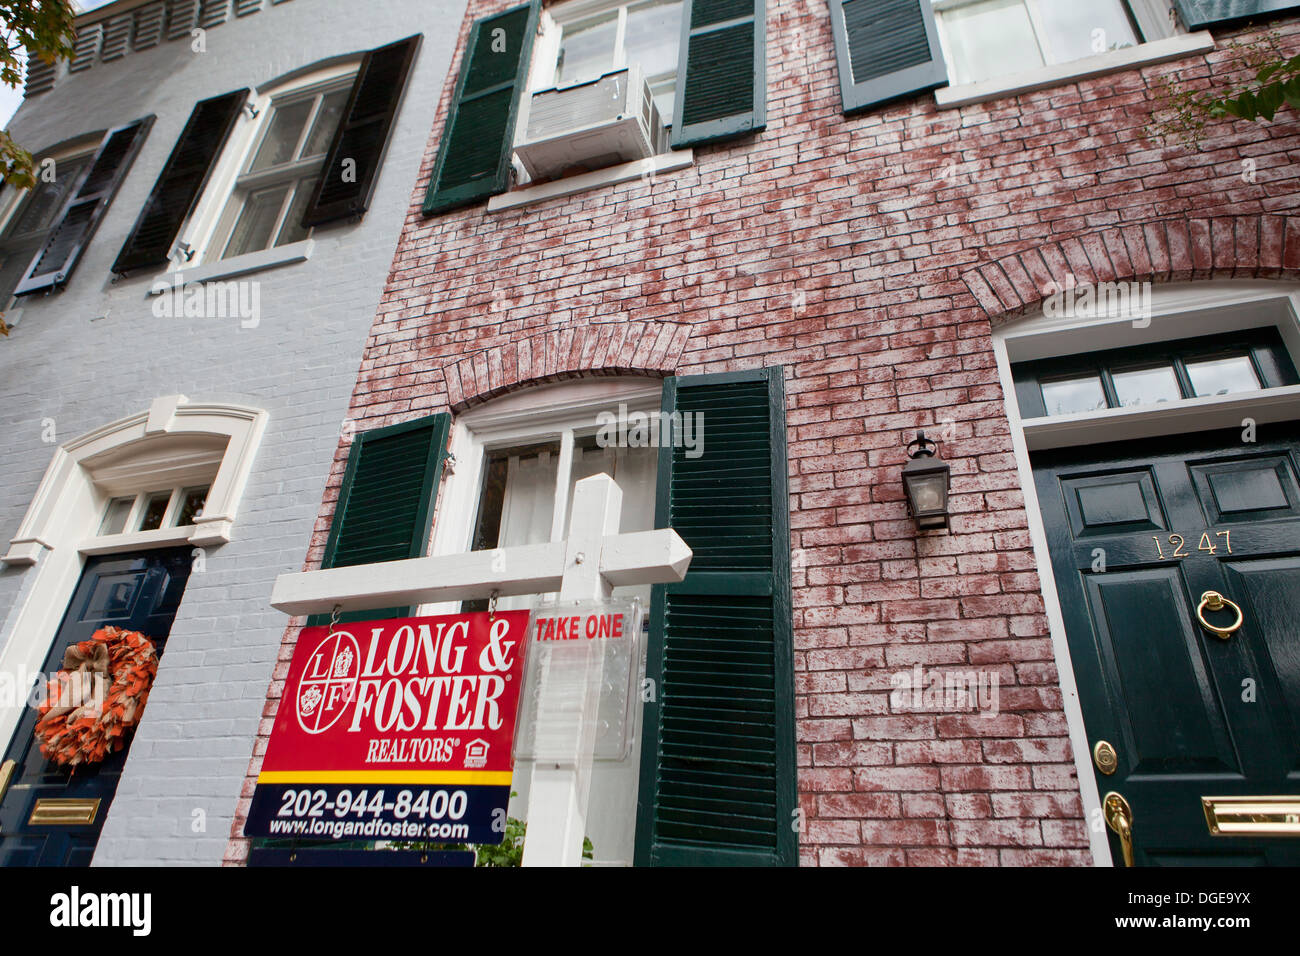 Realtor sign in front of townhouse - Washington, DC USA Stock Photo